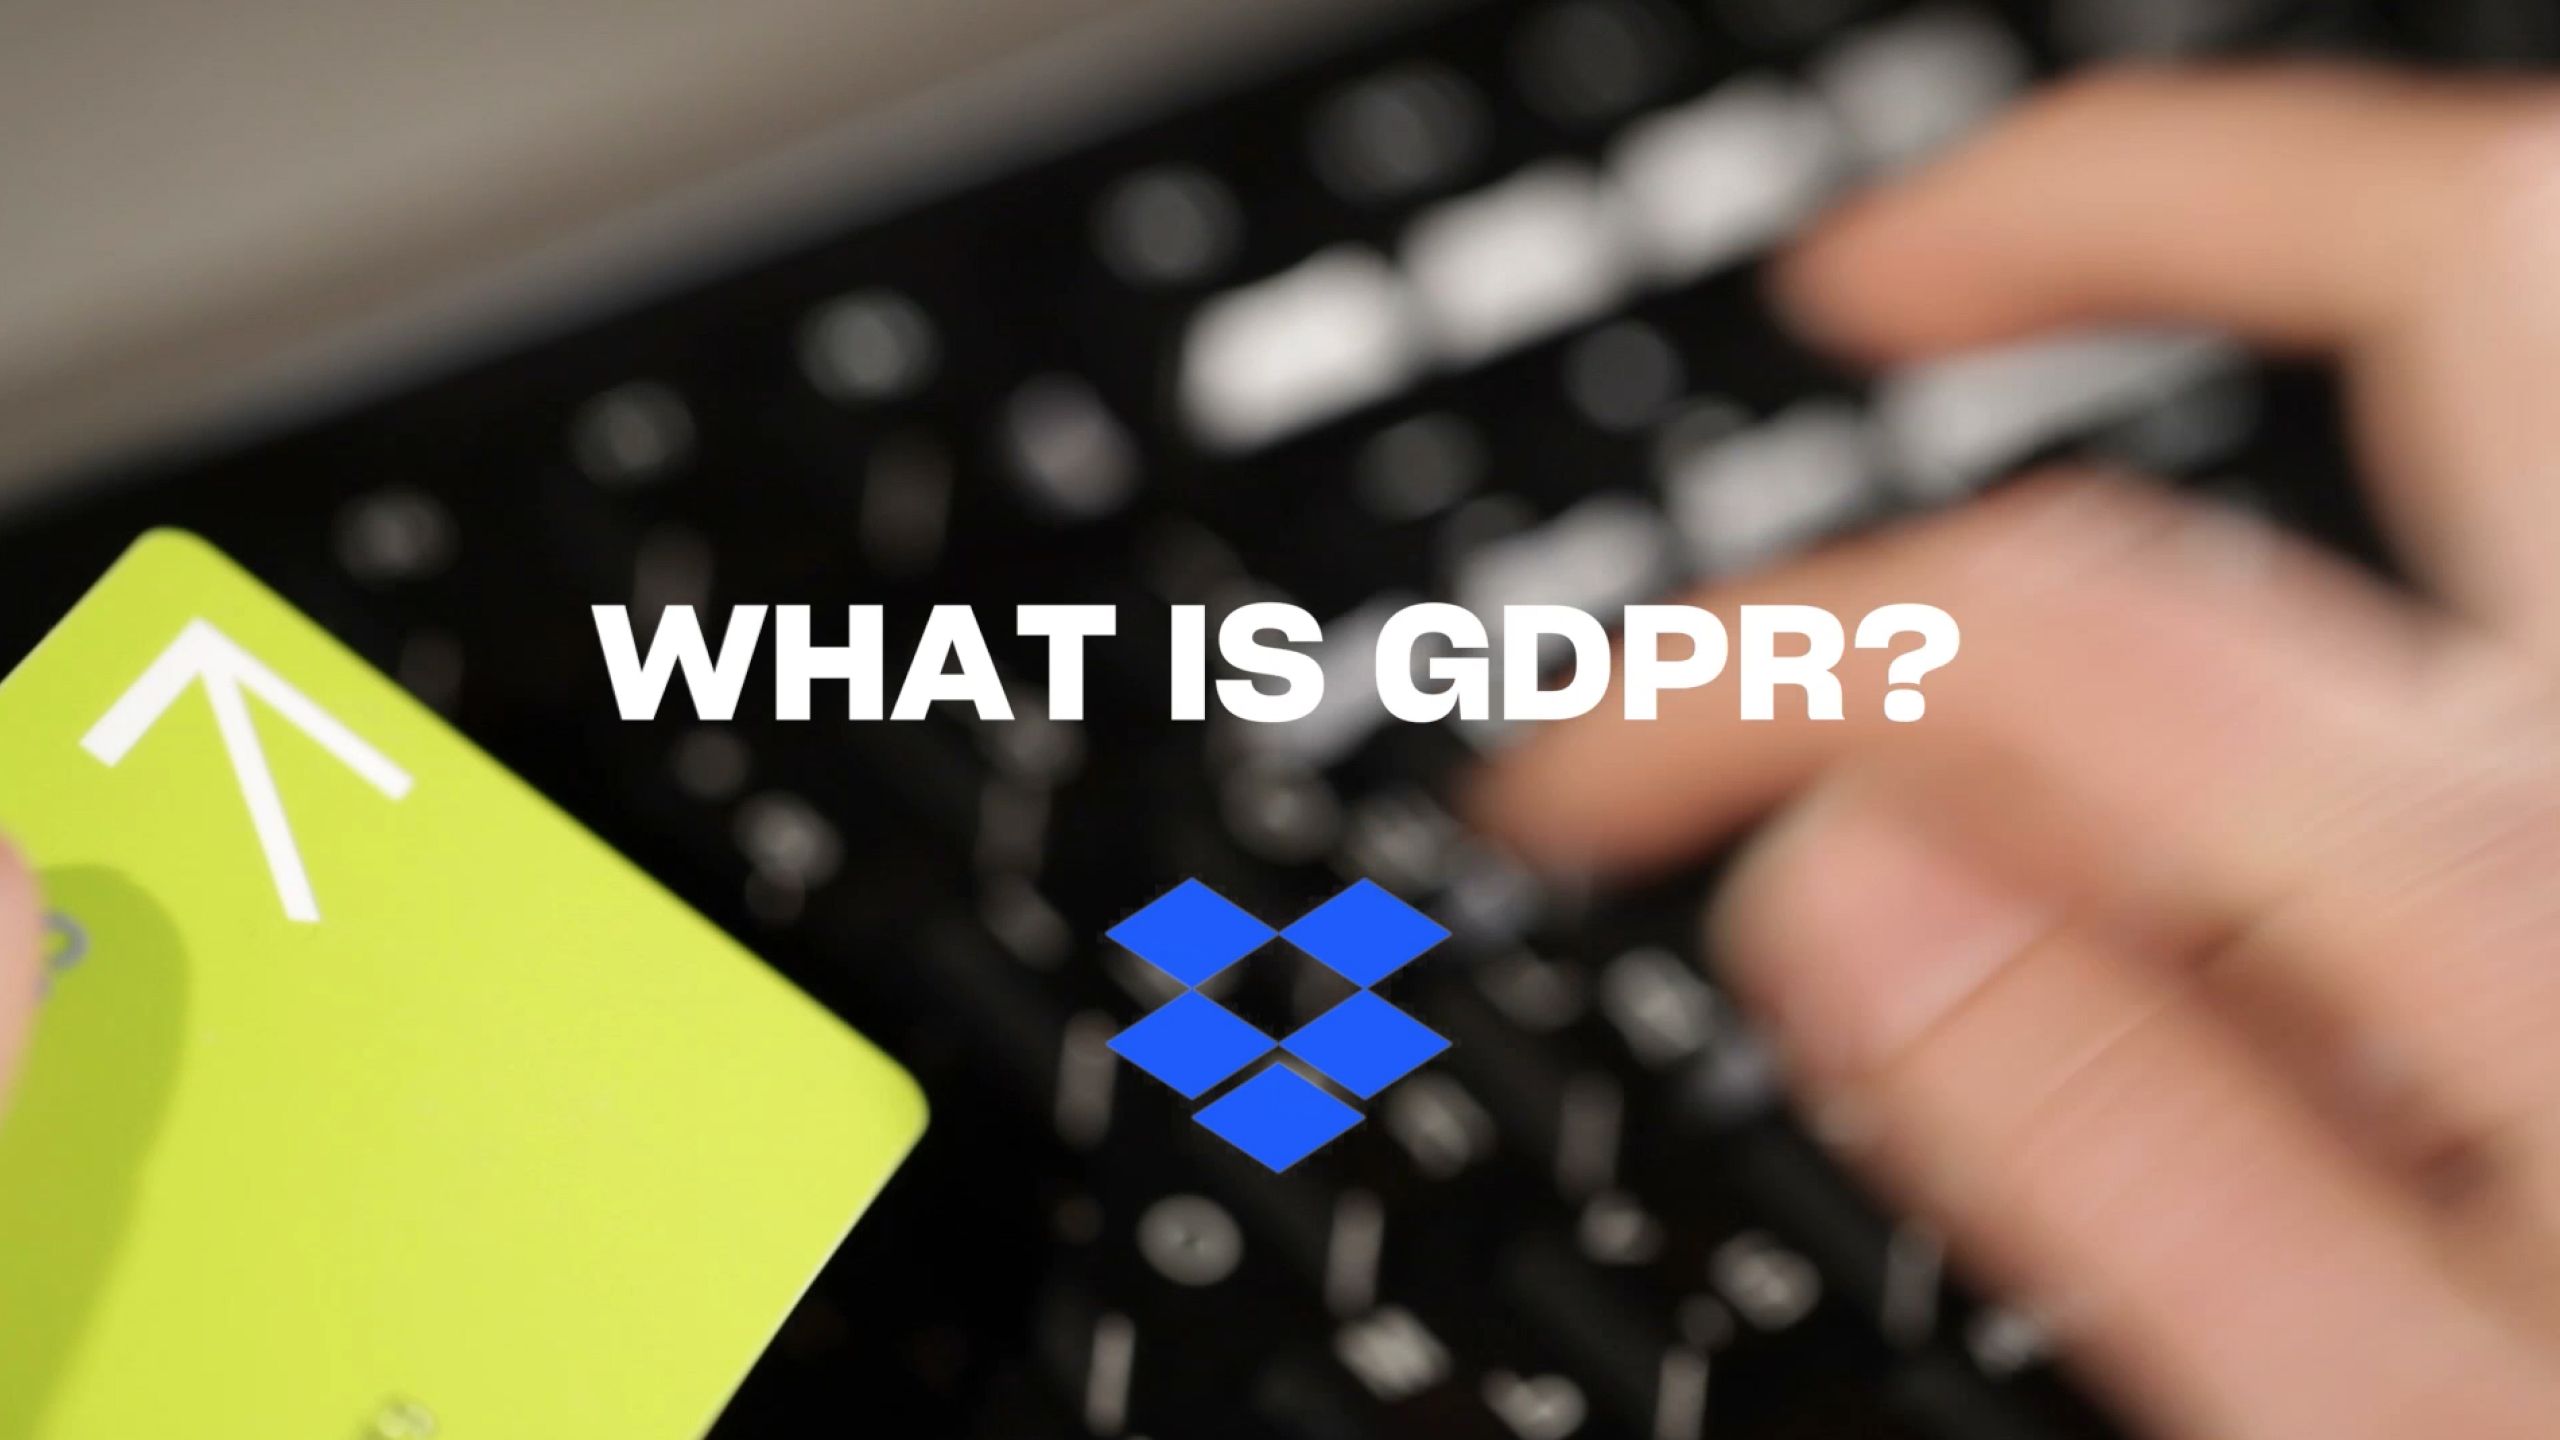 A video that answers the question ‘What is GDPR?’